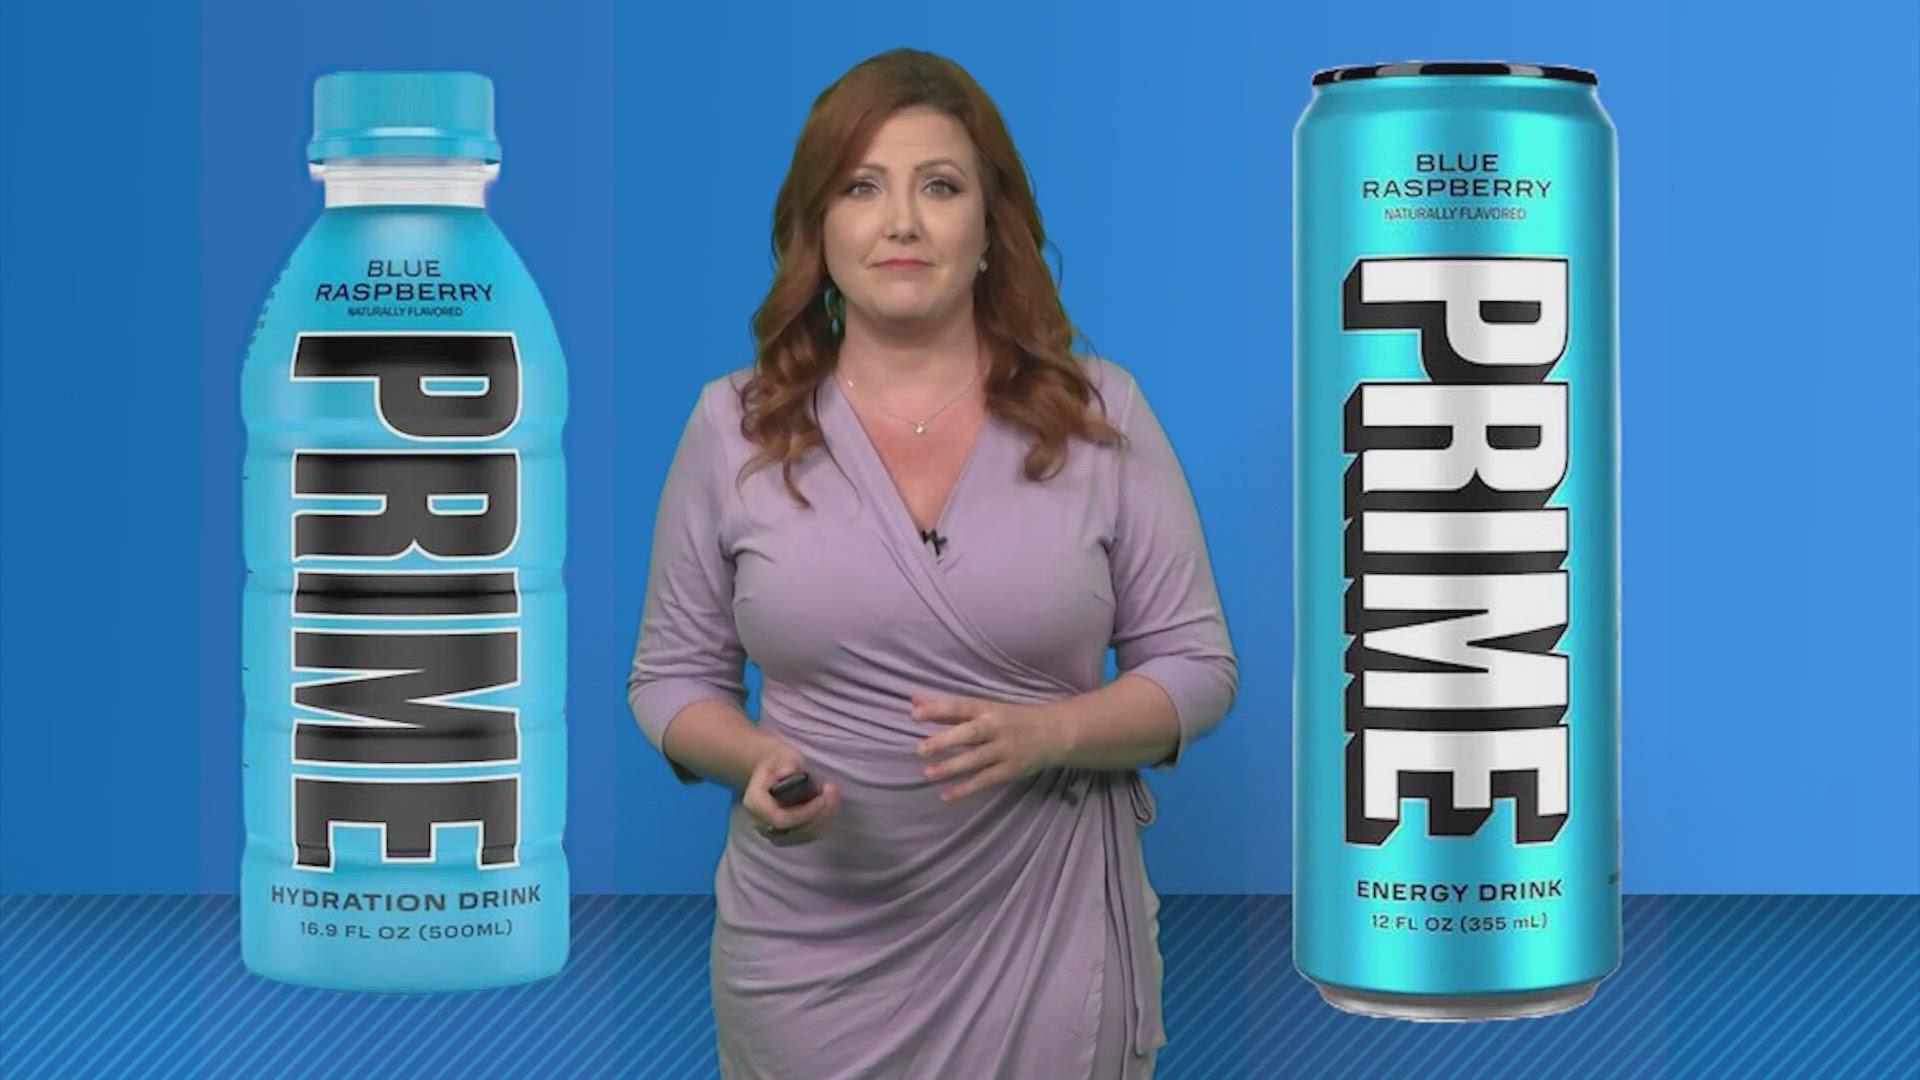 Social media is filled with videos of kids showing off their bottles, but experts say they should be careful, especially the energy version of PRIME.